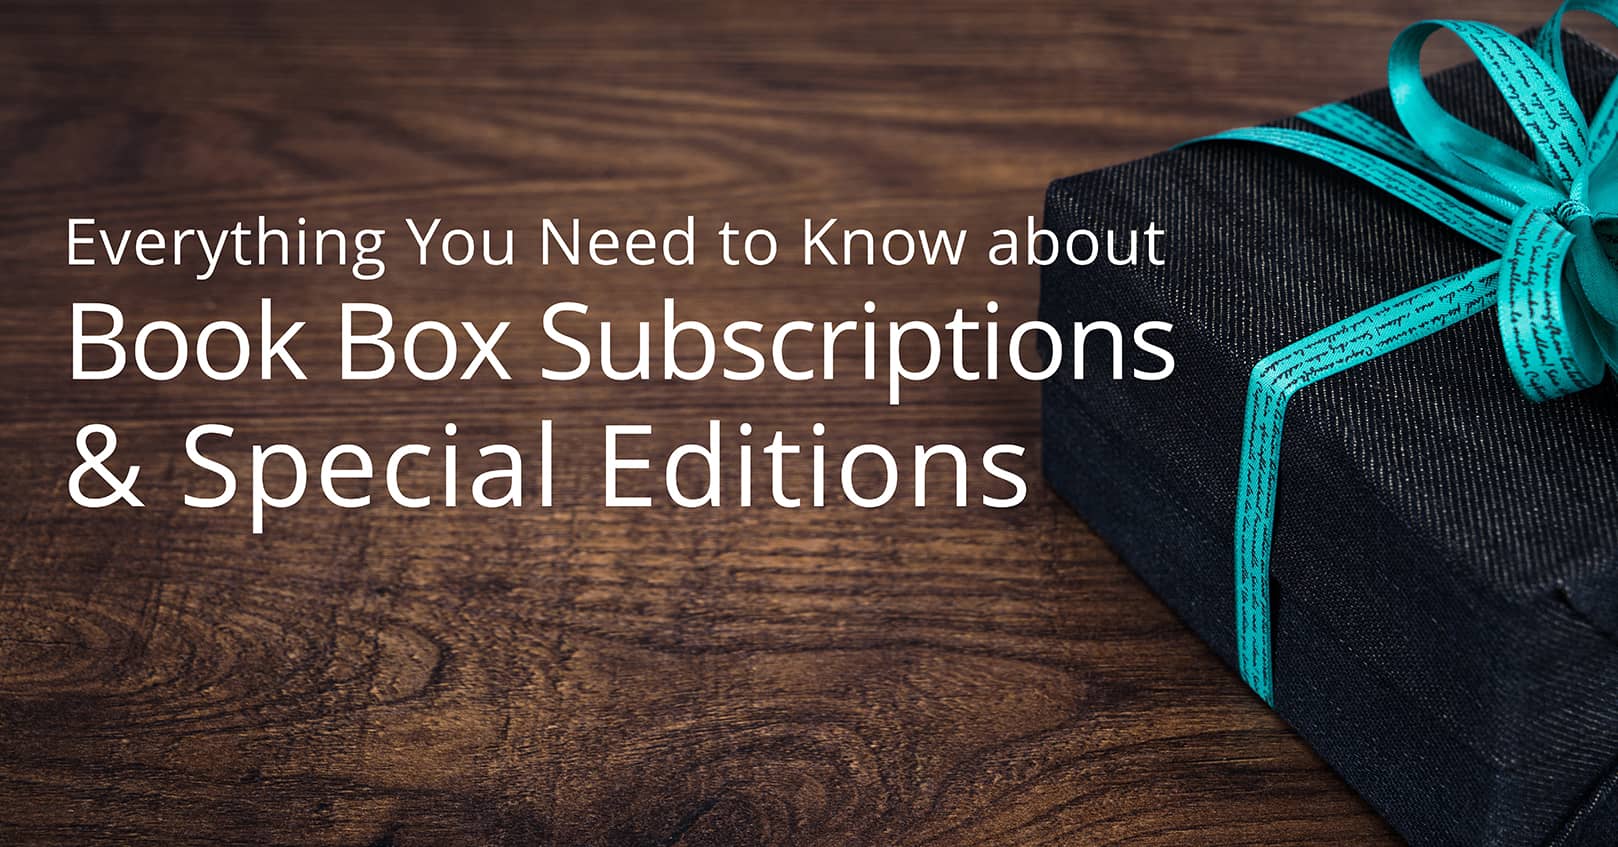 Book Box Subscriptions and Special Editions